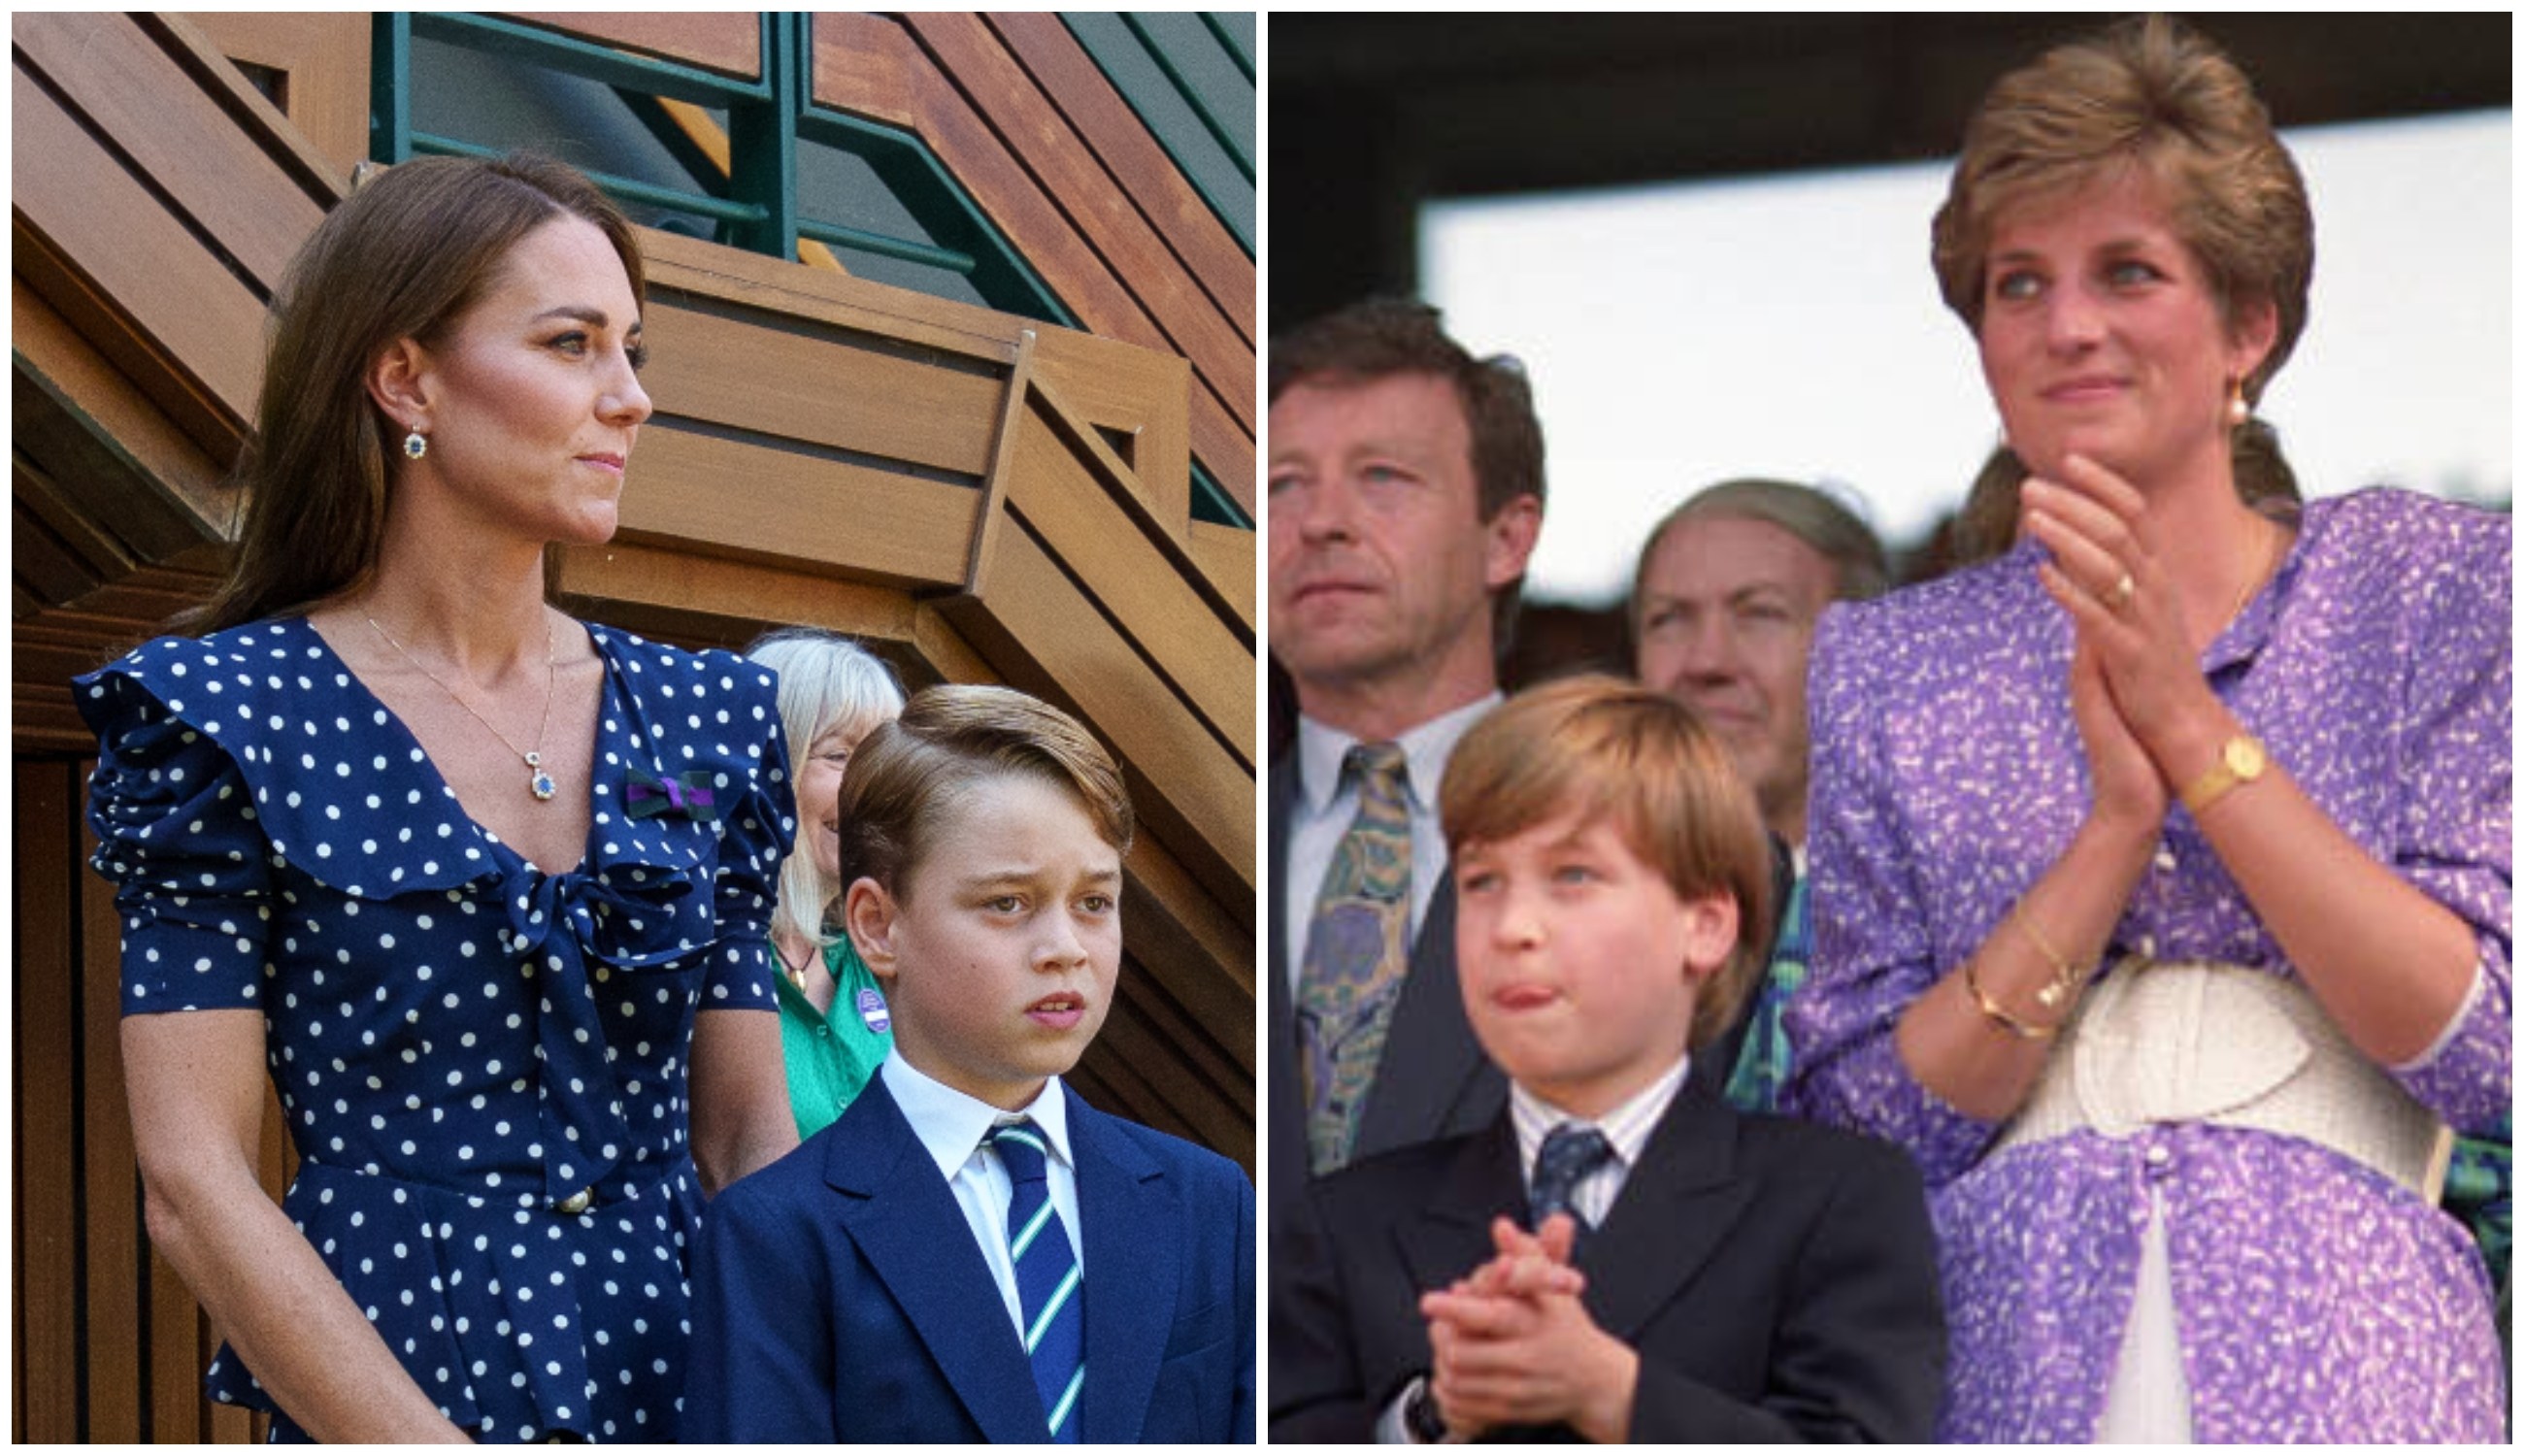 When Prince George joined his parents Kate Middleton and Prince William at the Wimbledon 2022 men’s final, all we could think about was his dad’s own tournament debut three decades earlier with mum Princess Diana. Photo: Getty